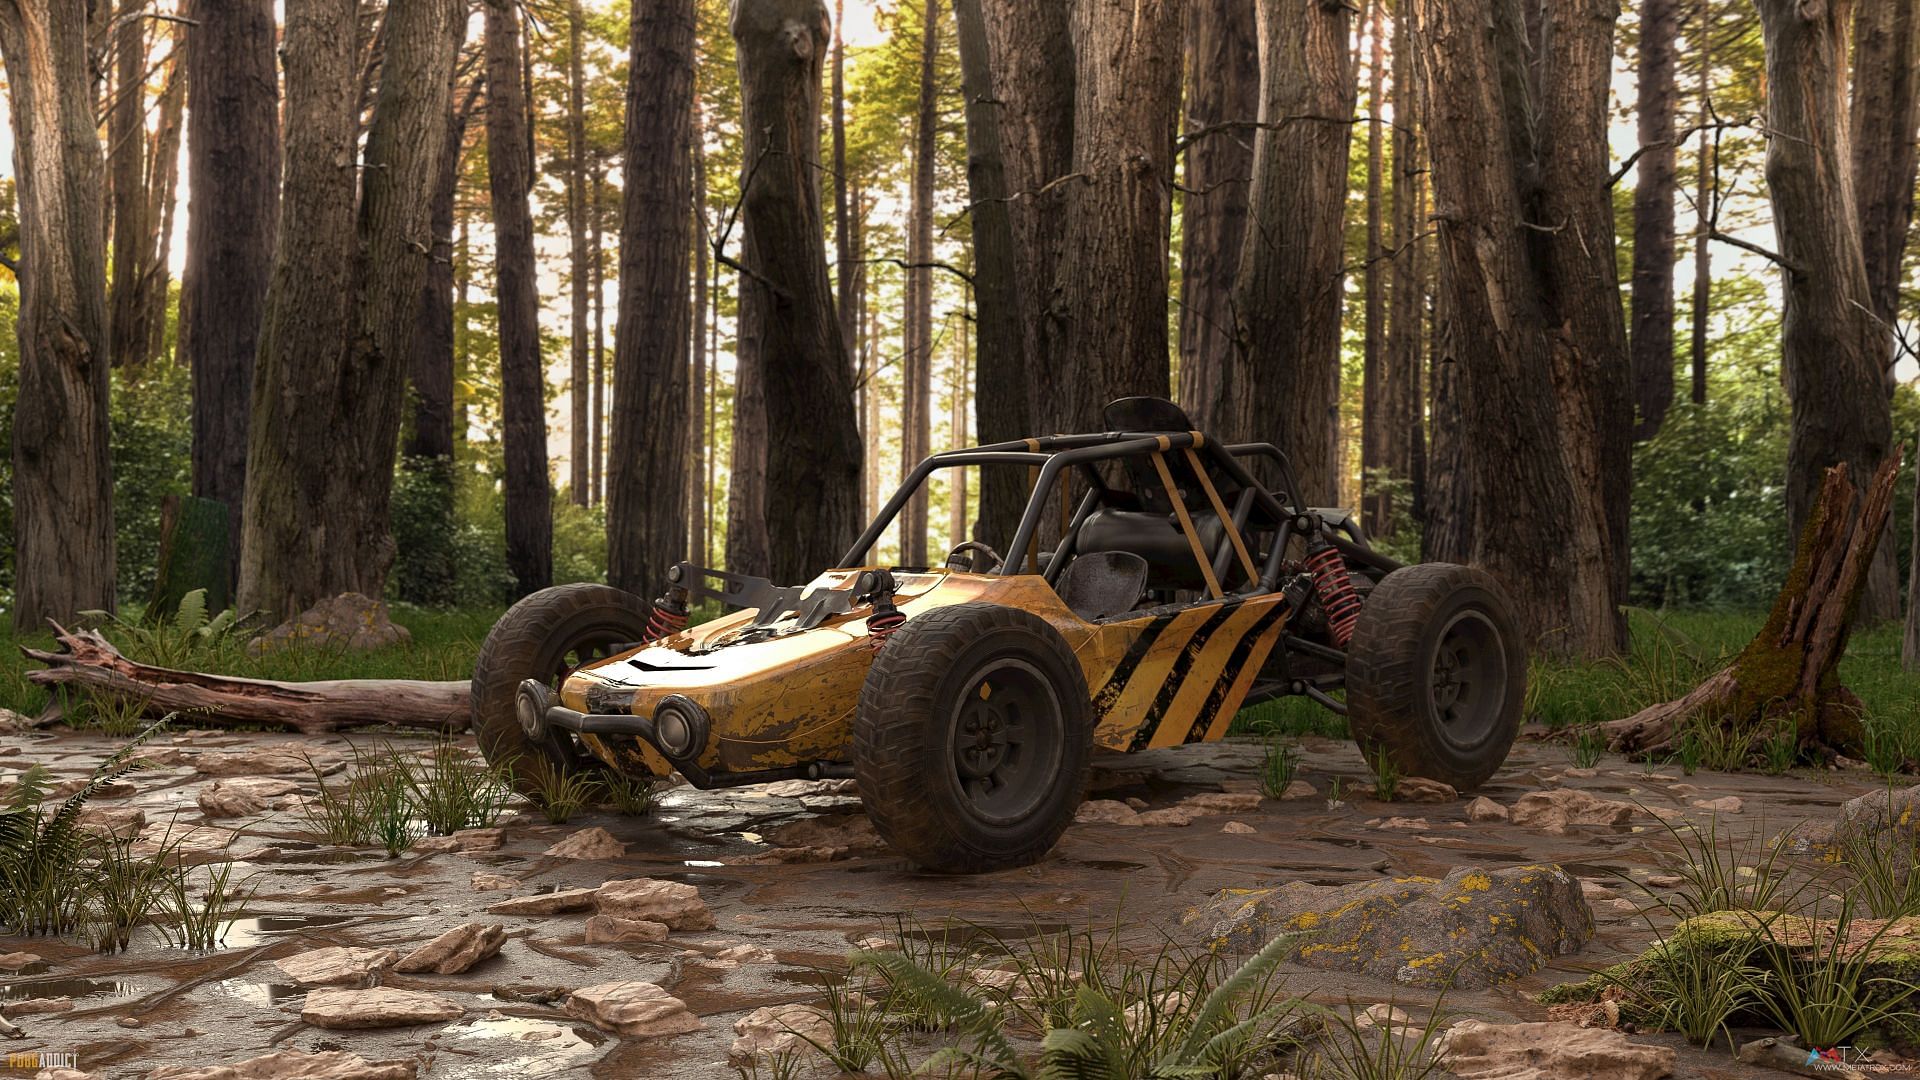 Dune Buggies should be added to Fortnite in Chapter 2 Season 8 (Image via PUBG)